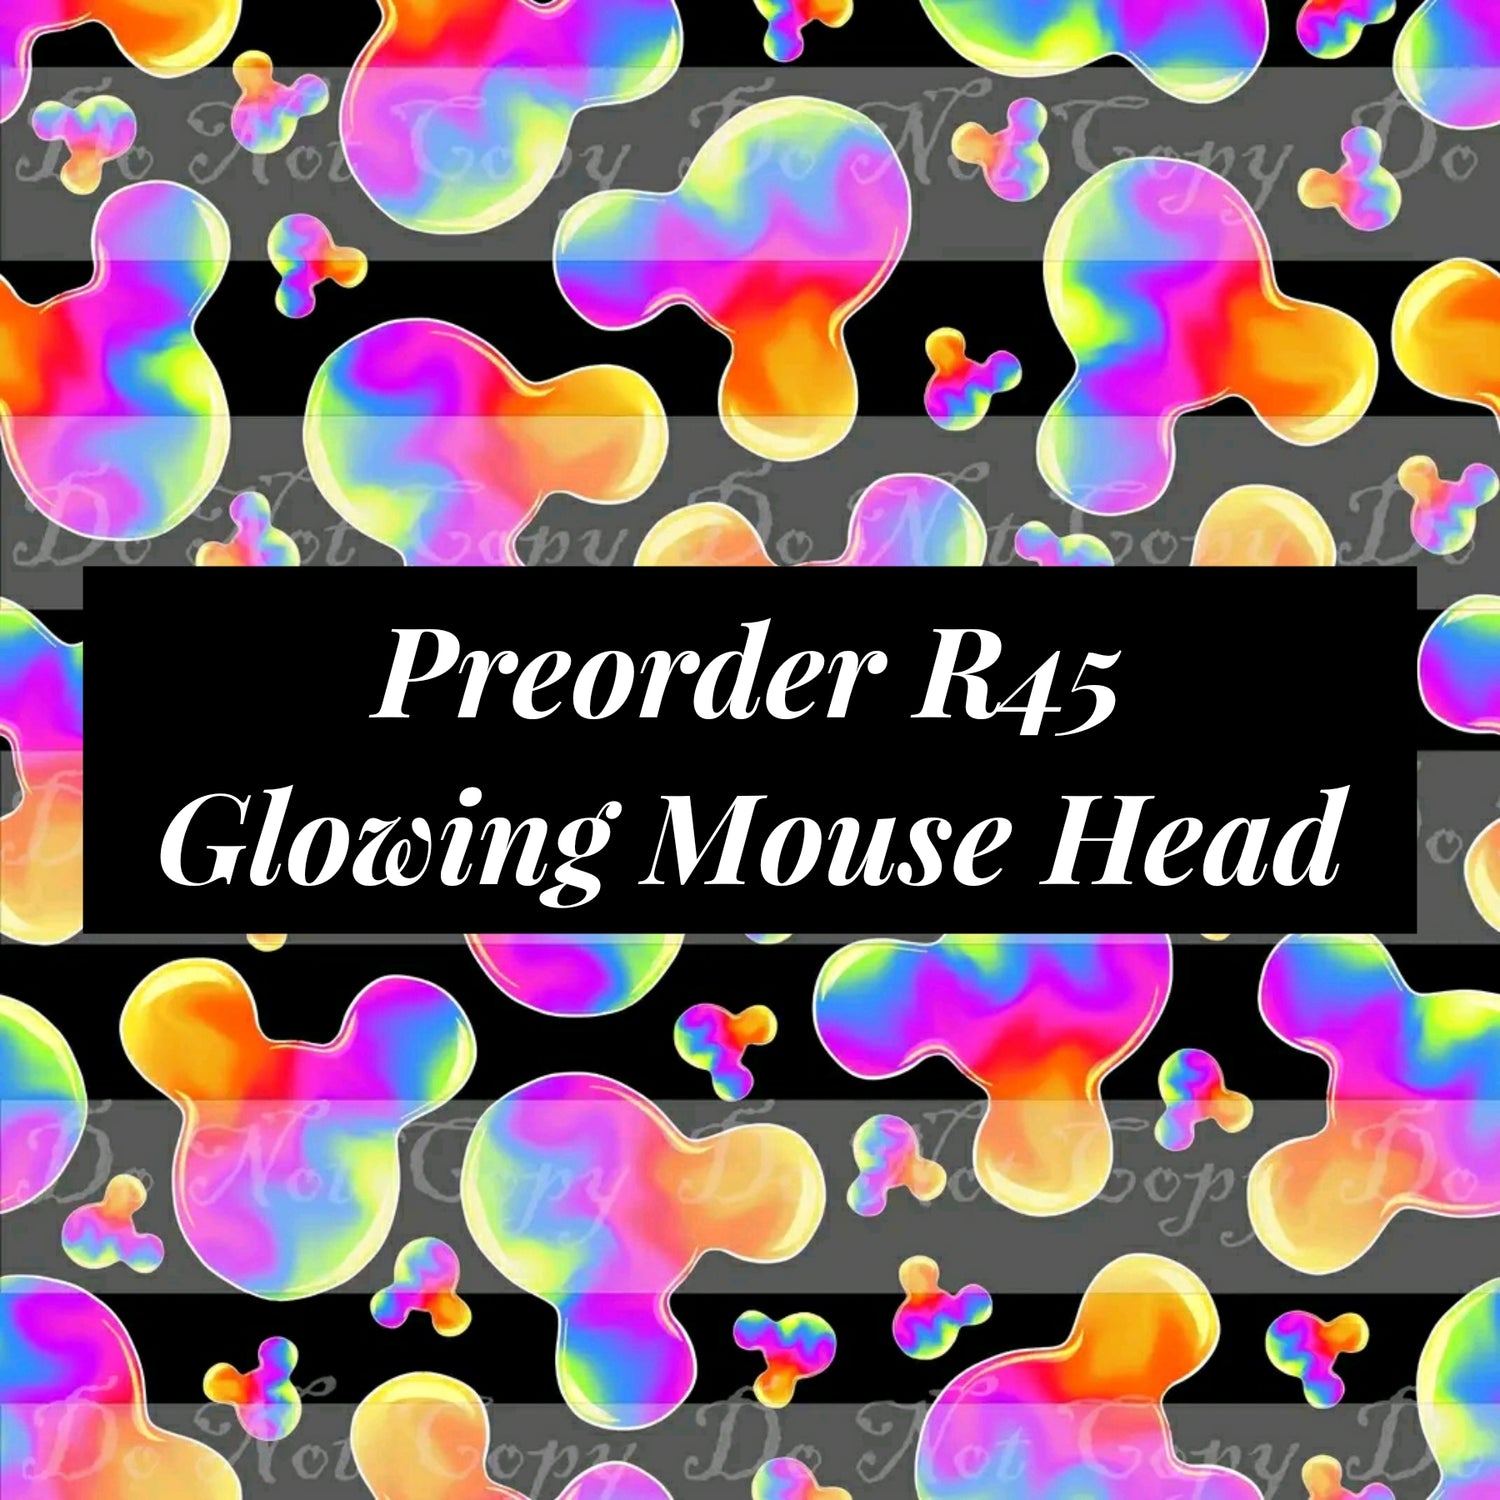 PREORDER R45 - Glowing Mouse Head